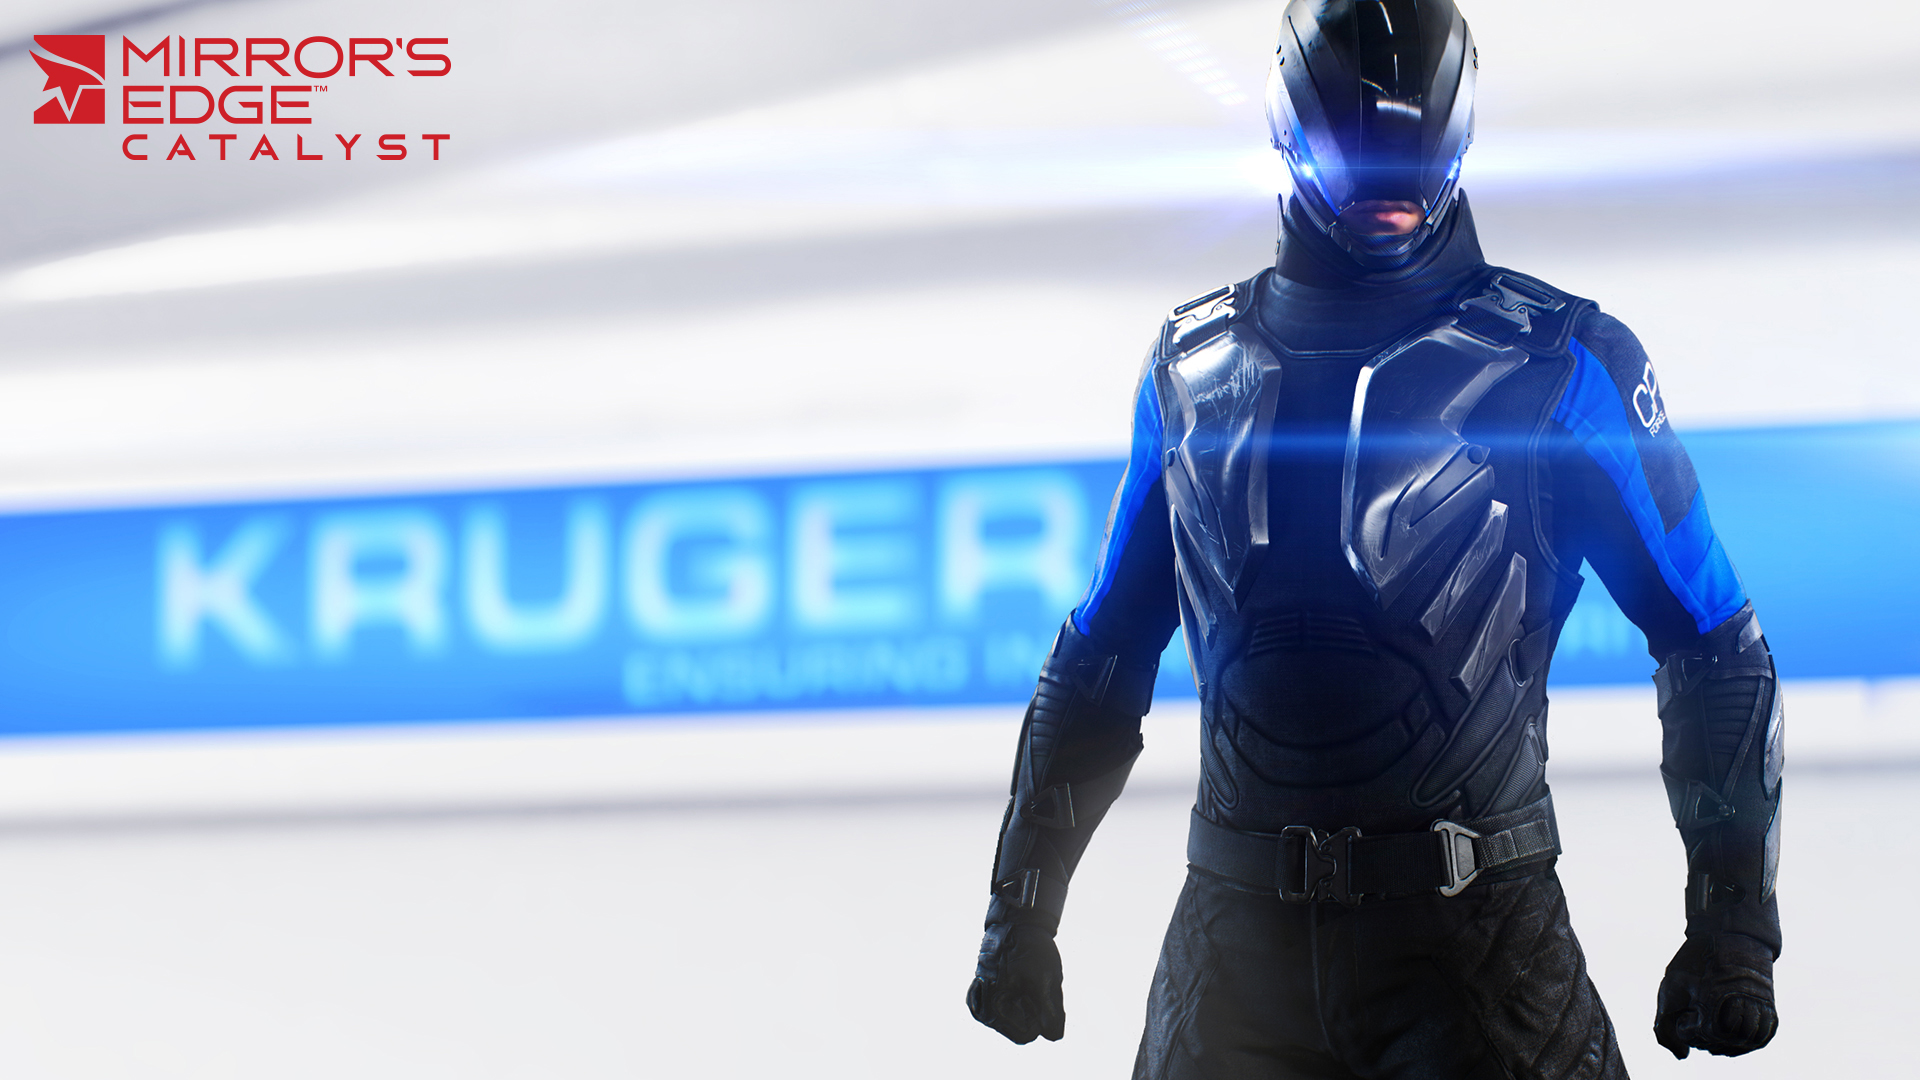 Mirror's Edge seemingly no longer being delisted from digital stores